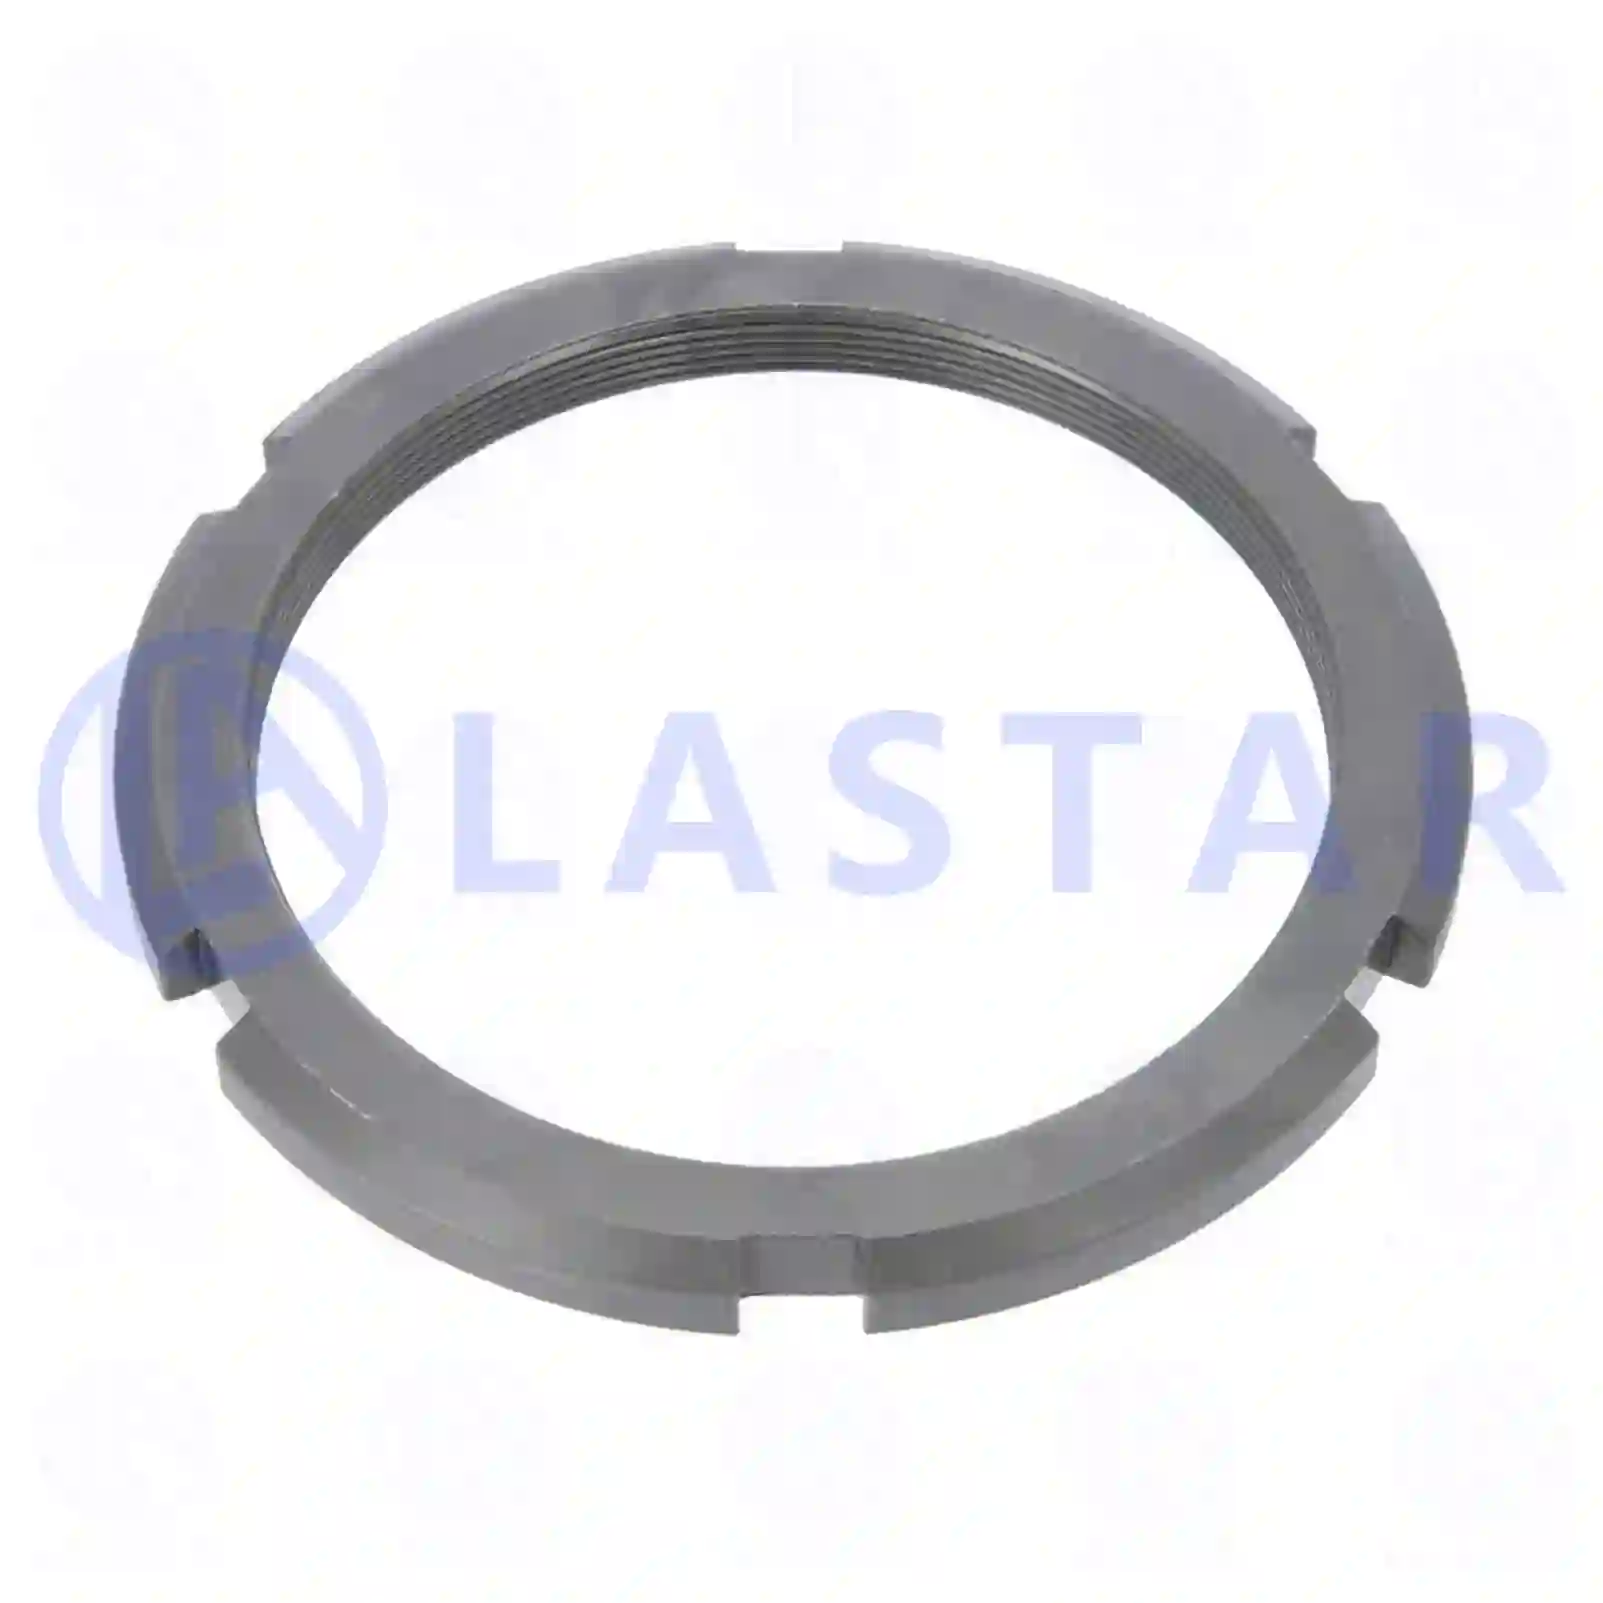 Grooved nut, 77726268, 9903260 ||  77726268 Lastar Spare Part | Truck Spare Parts, Auotomotive Spare Parts Grooved nut, 77726268, 9903260 ||  77726268 Lastar Spare Part | Truck Spare Parts, Auotomotive Spare Parts